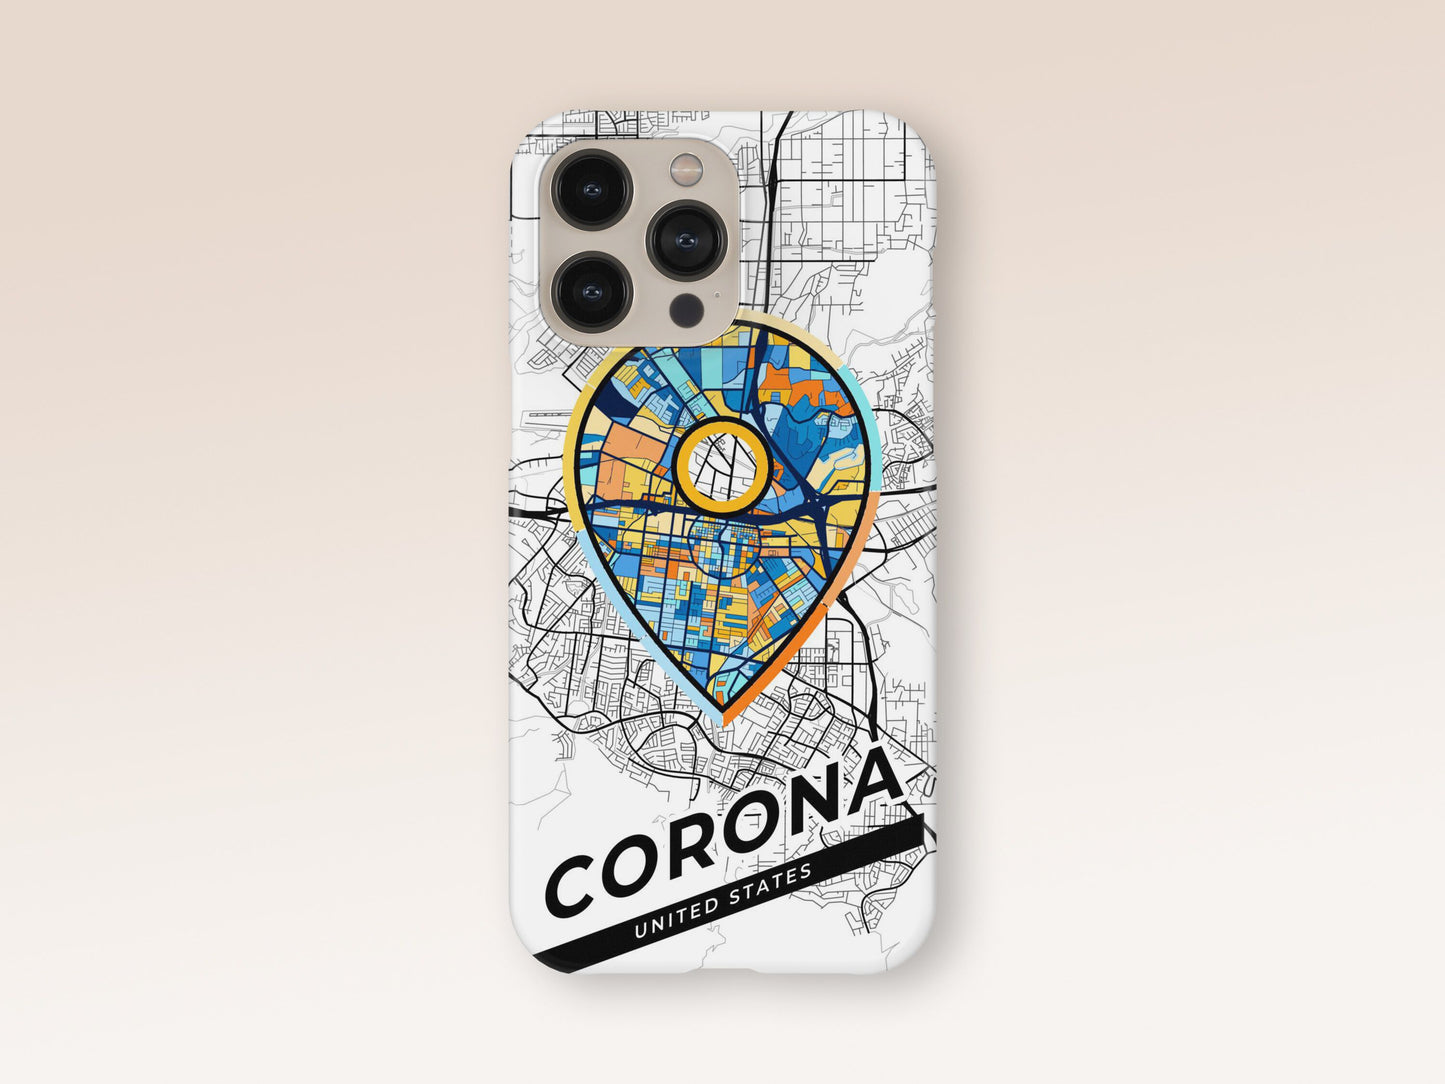 Corona California slim phone case with colorful icon. Birthday, wedding or housewarming gift. Couple match cases. 1